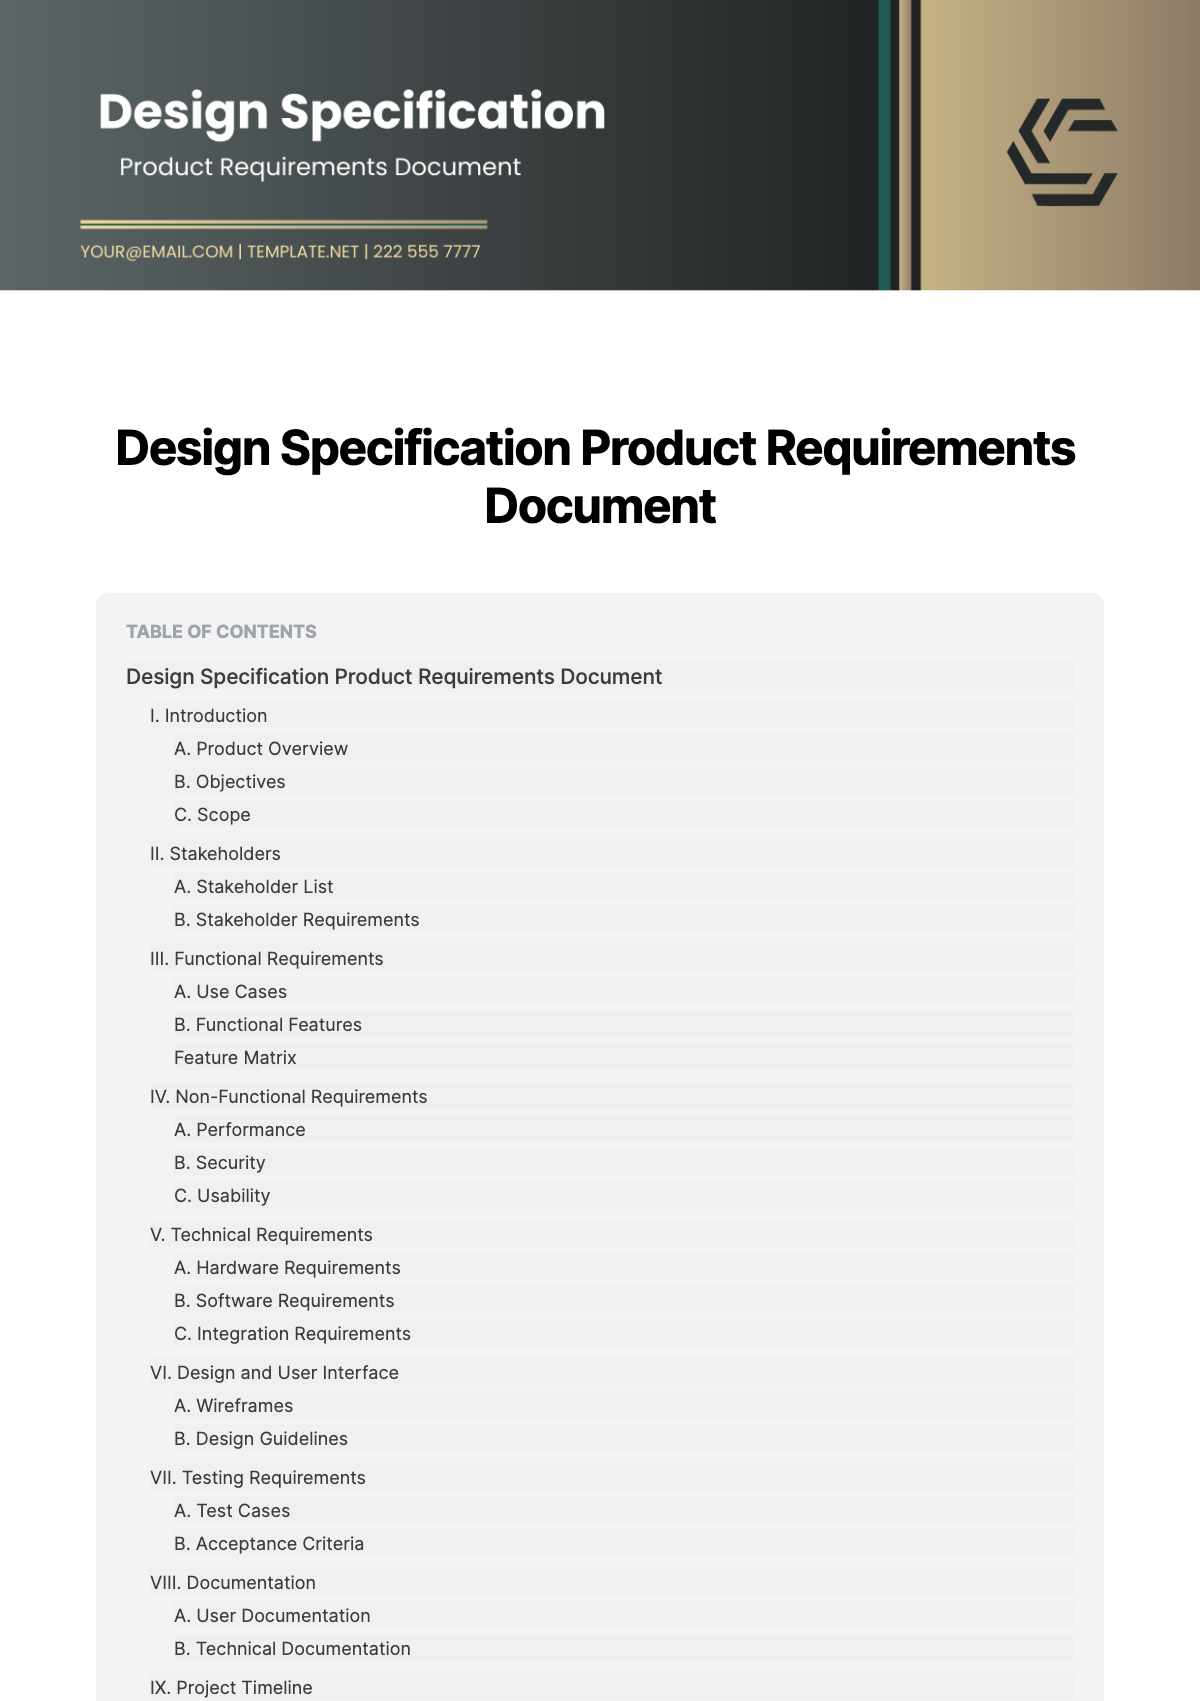 Design Specification Product Requirements Document Template